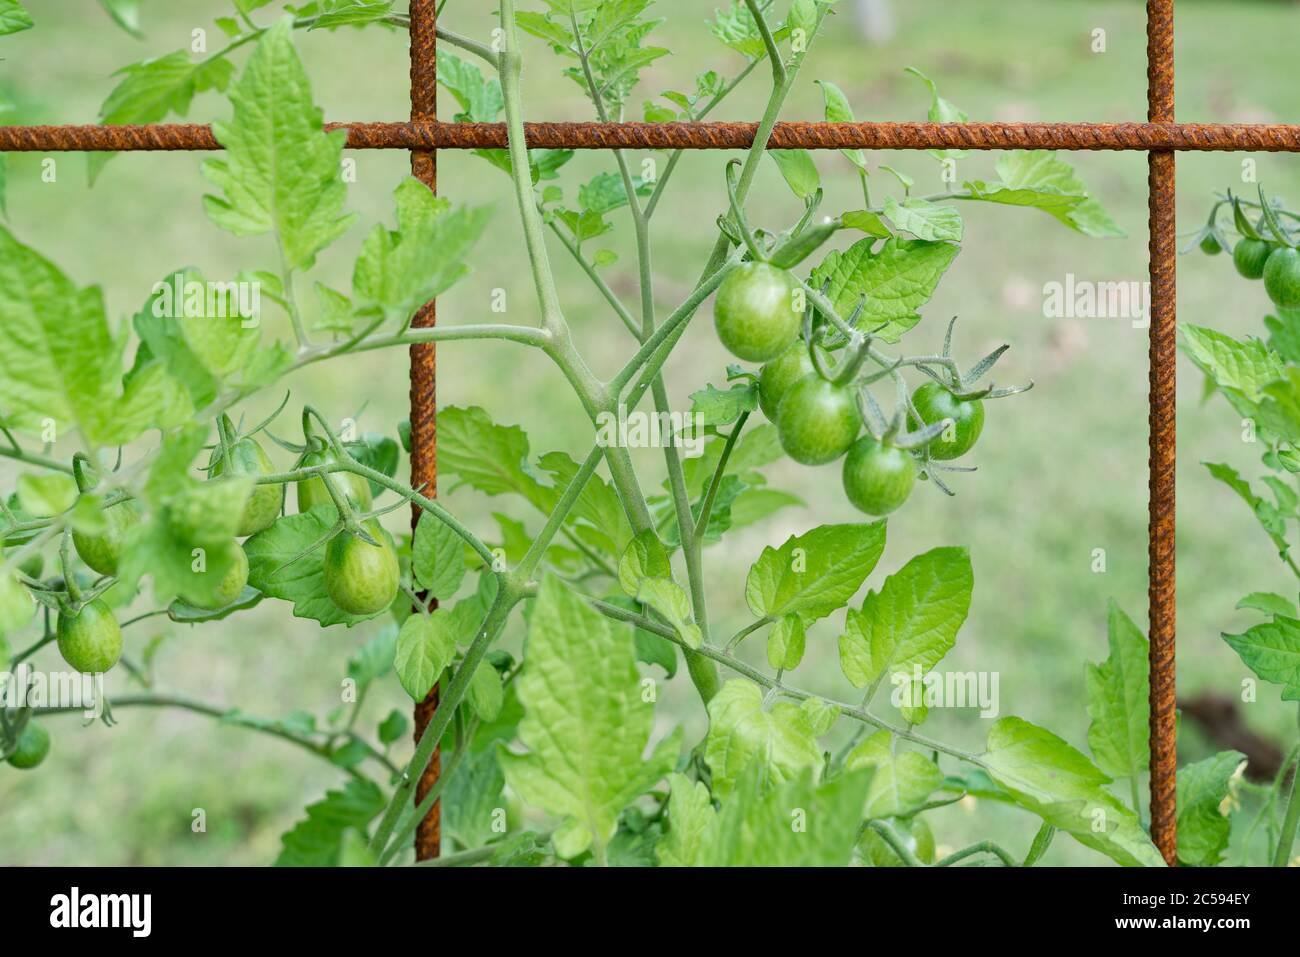 Trusses of grape tomatoes and cherry tomatoes growing on a mesh trellis Stock Photo